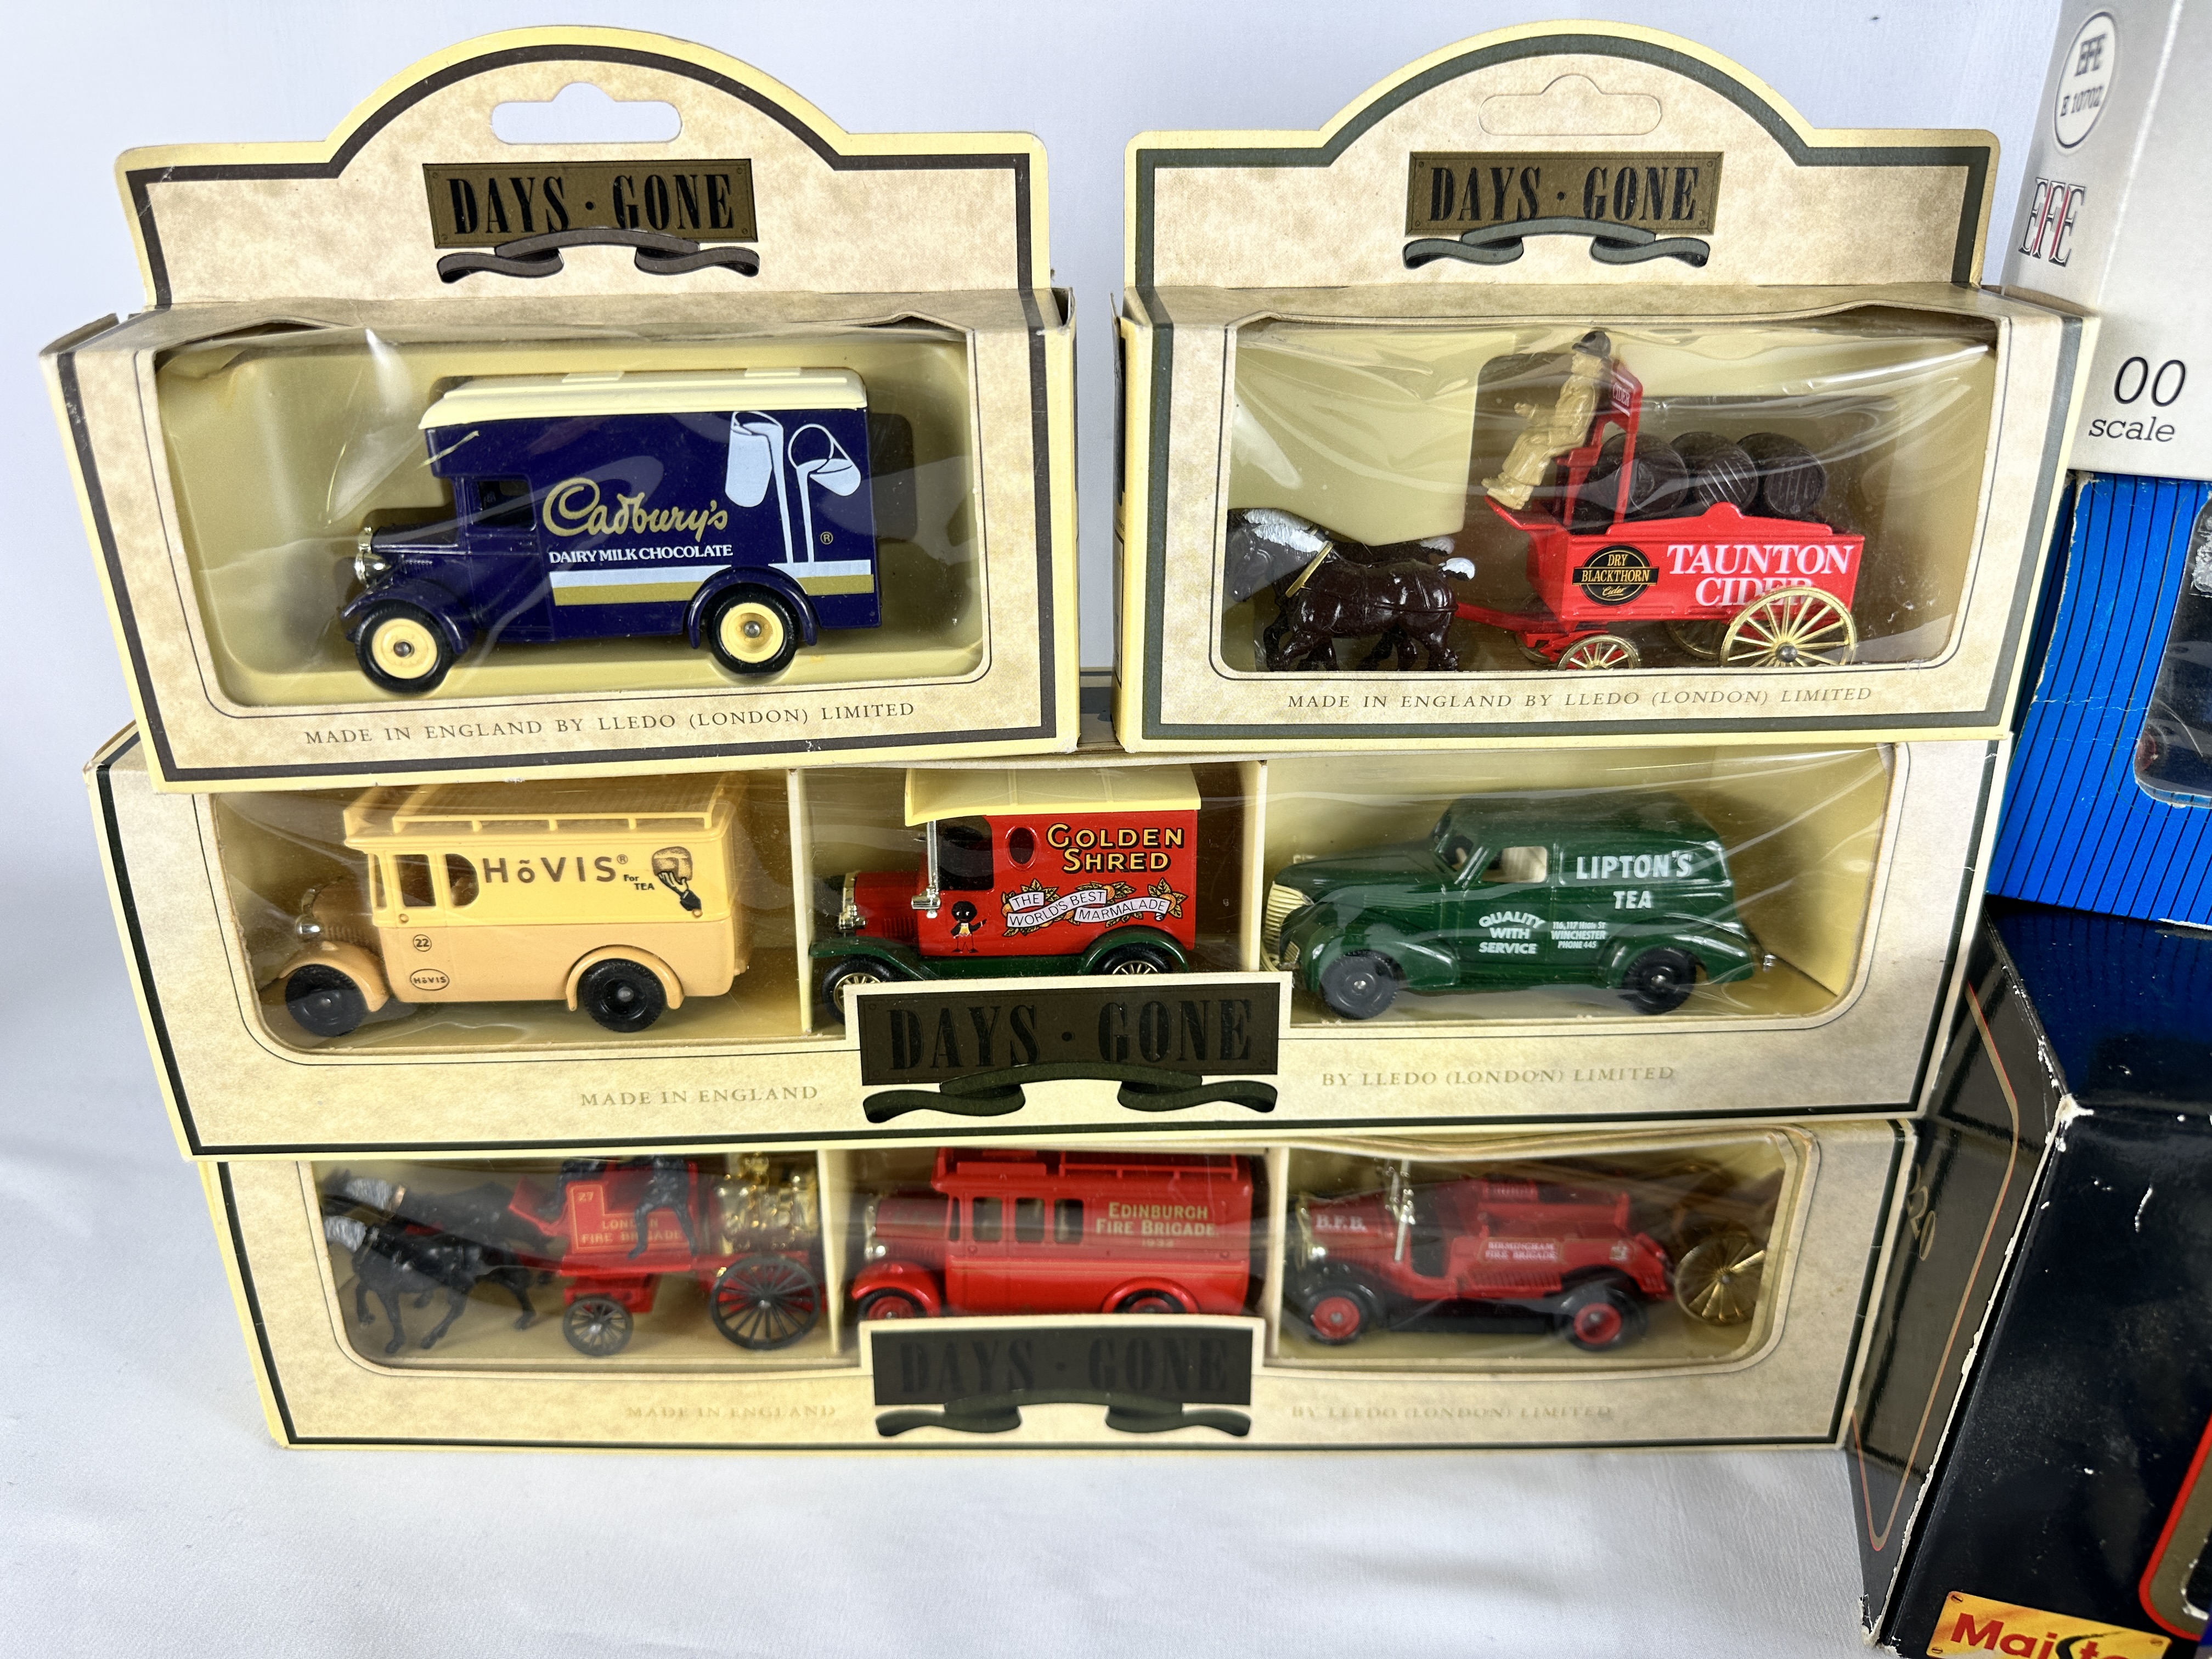 Corgi F1 model car, together with other model vehicles - Image 2 of 9